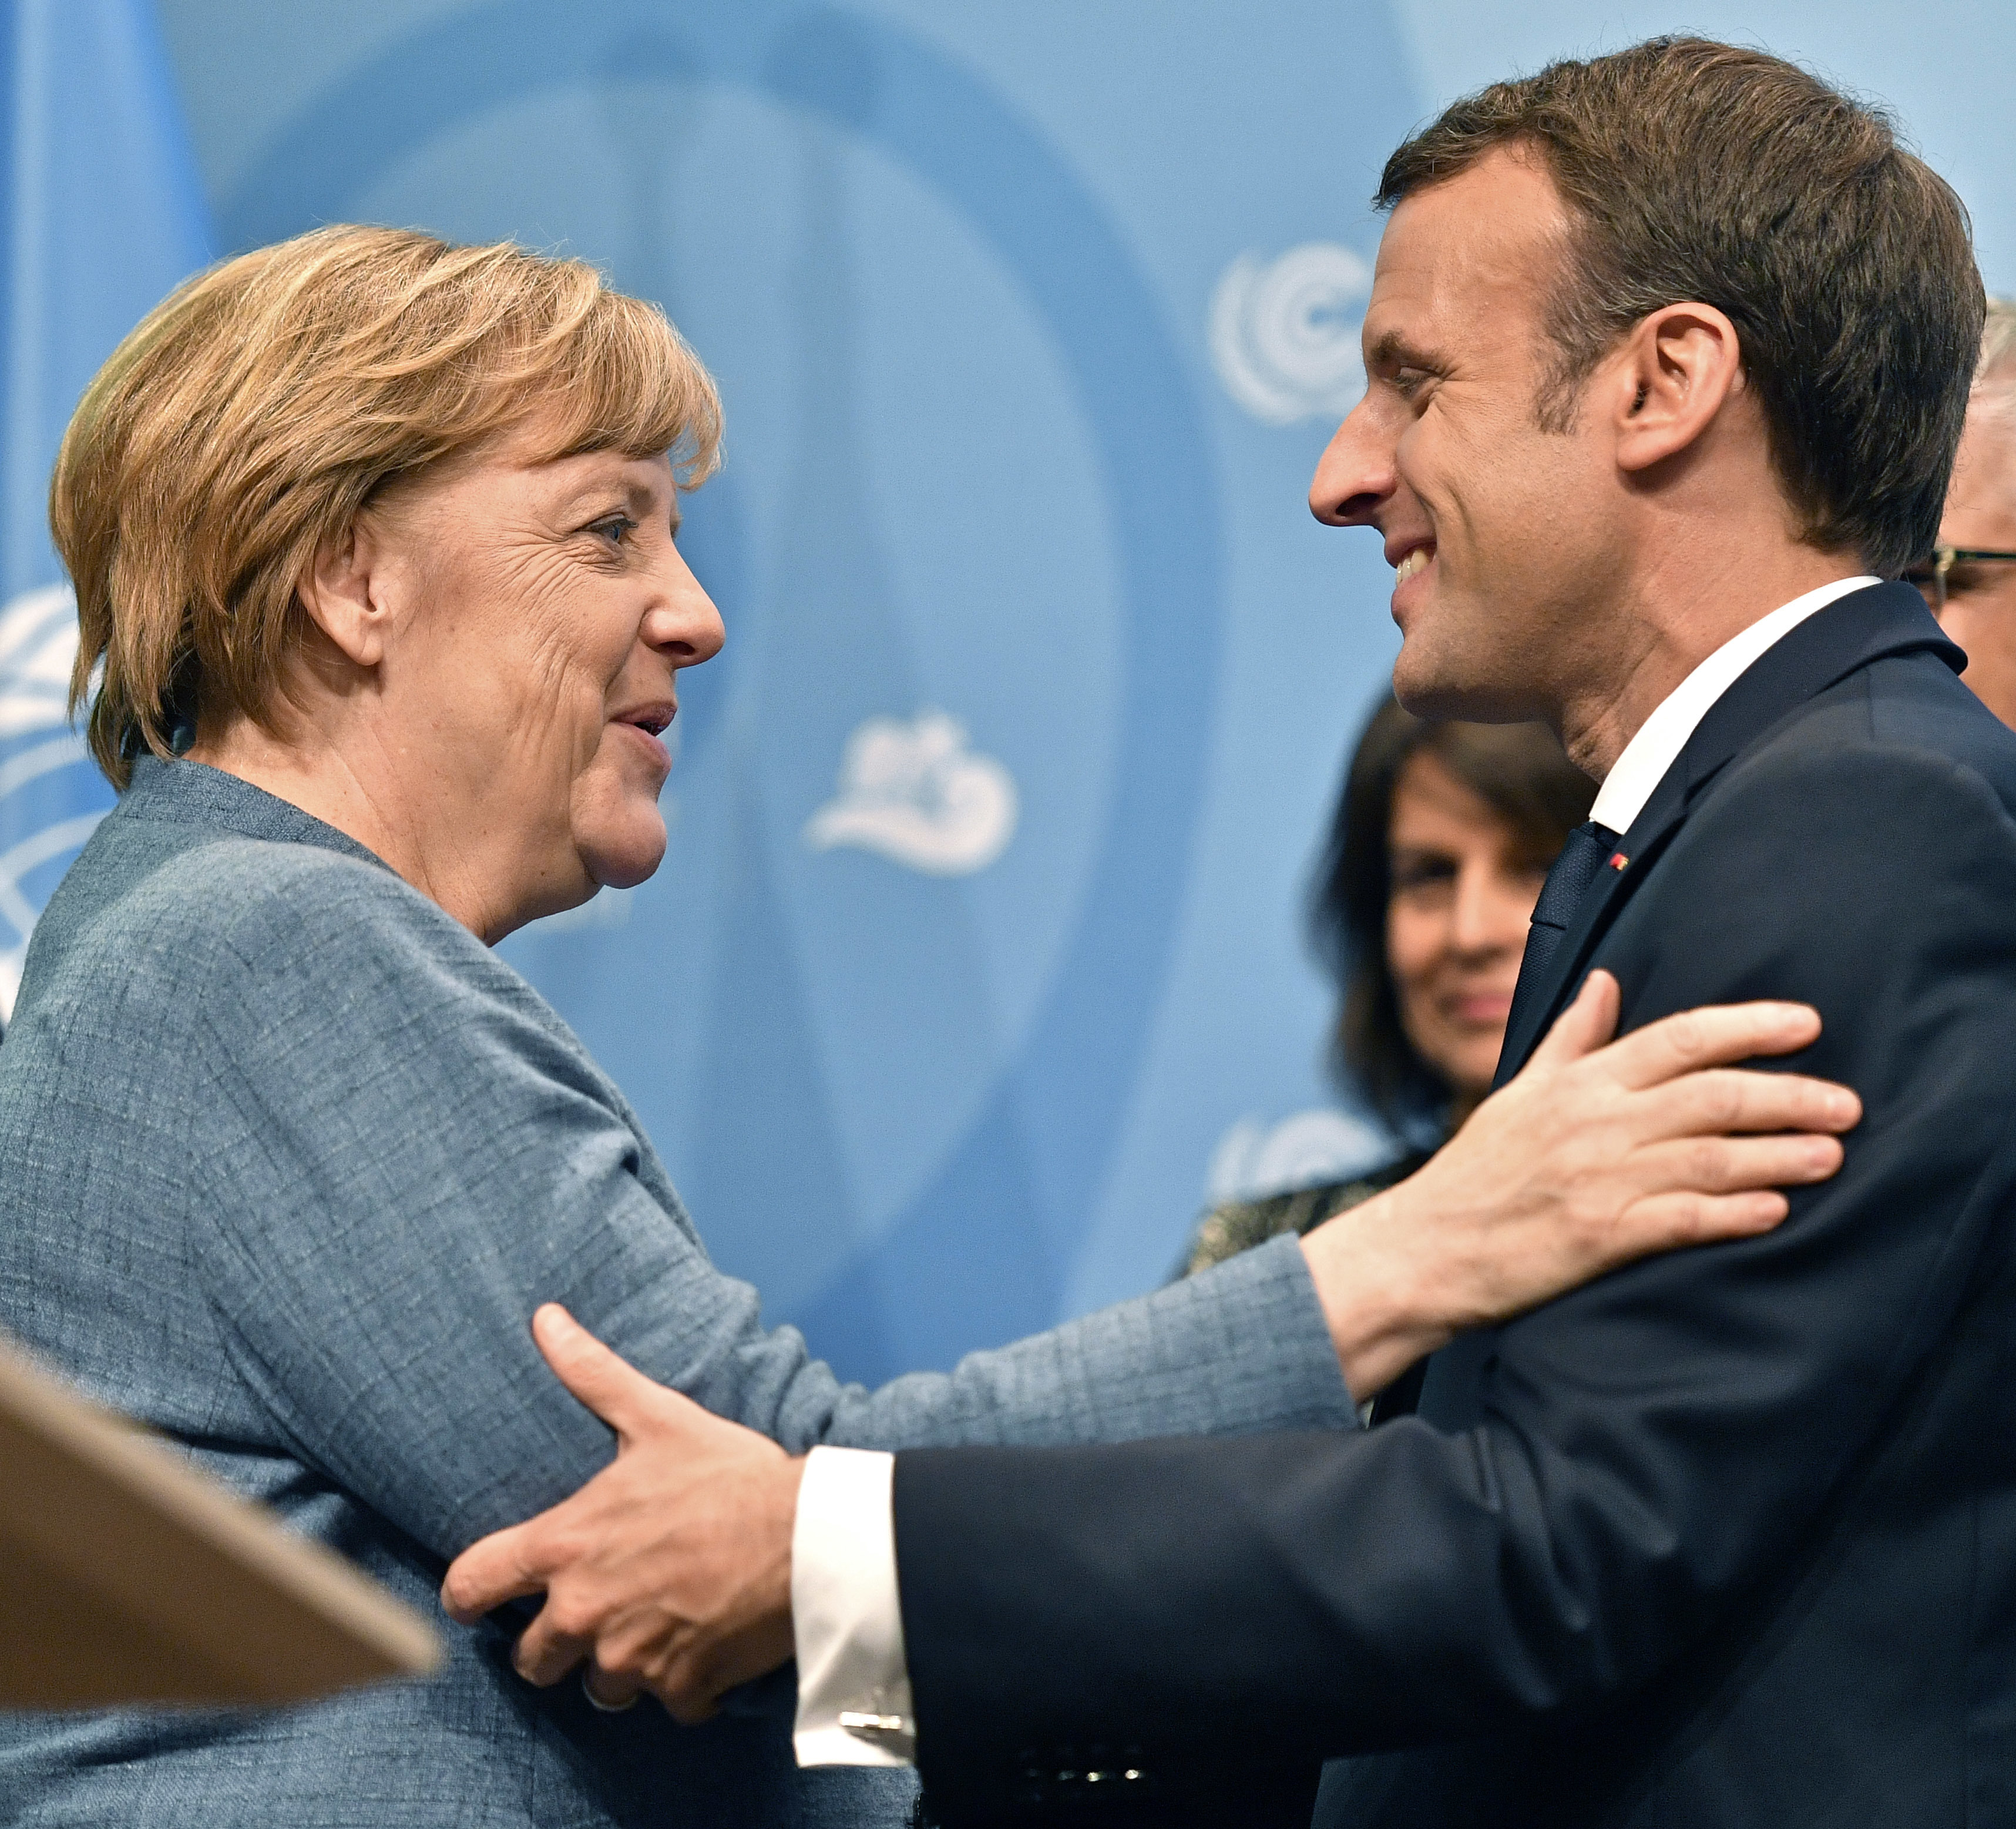 German Chancellor Angela Merkel, left, welcomes French President Emmanuel Macron during the 23rd Conference of the Parties (COP) climate talks in Bonn, Germany, Wednesday, Nov. 15, 2017. World leaders arrive at the global climate talks in Germany on Wednesday to give the negotiations a boost going into the final stretch. (AP Photo/Martin Meissner)